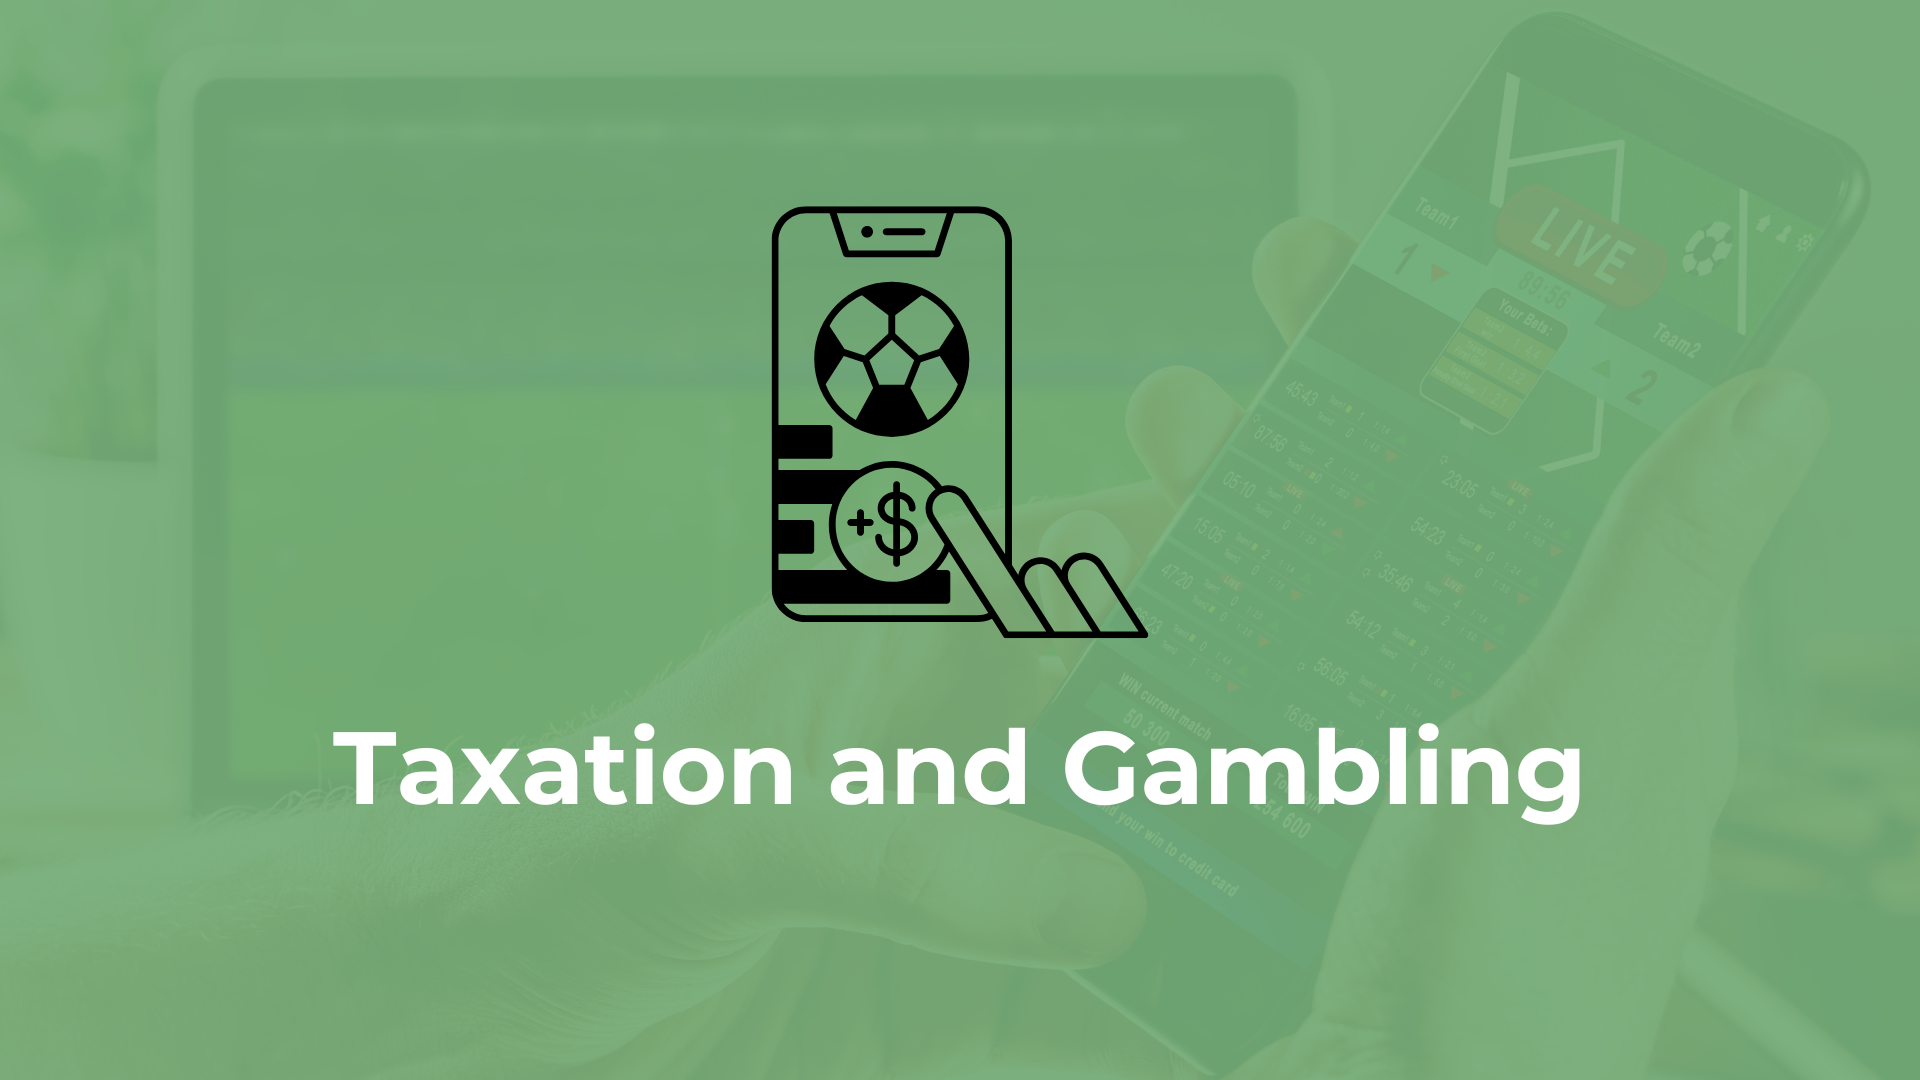 Taxation and gambling